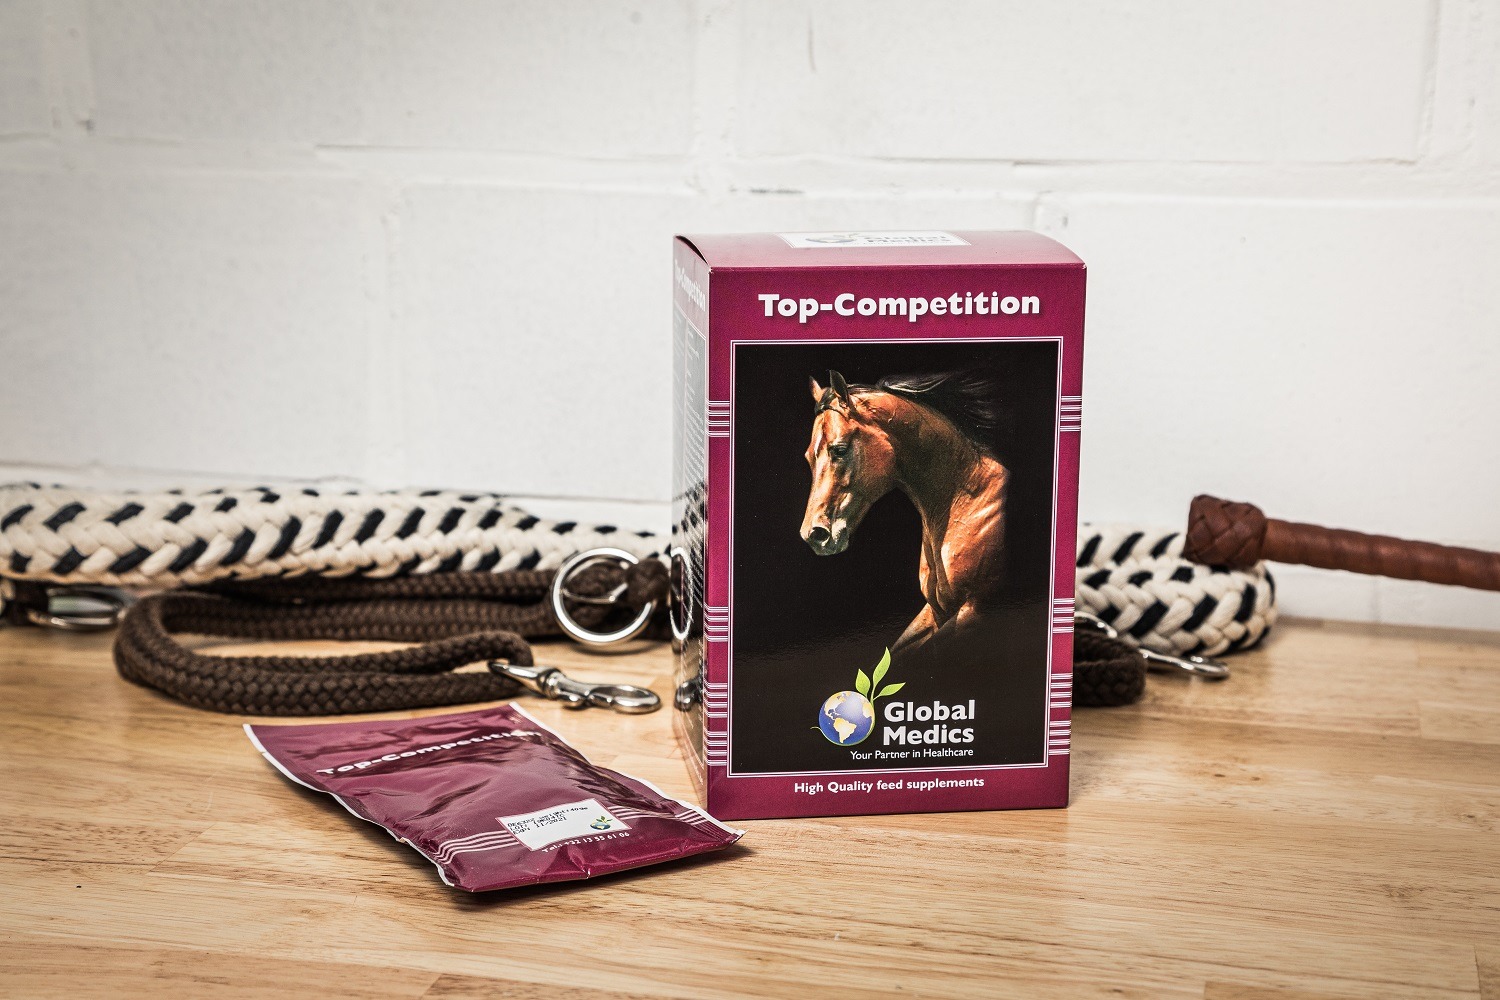 Top-Competition - Global Medics Horse Supplements